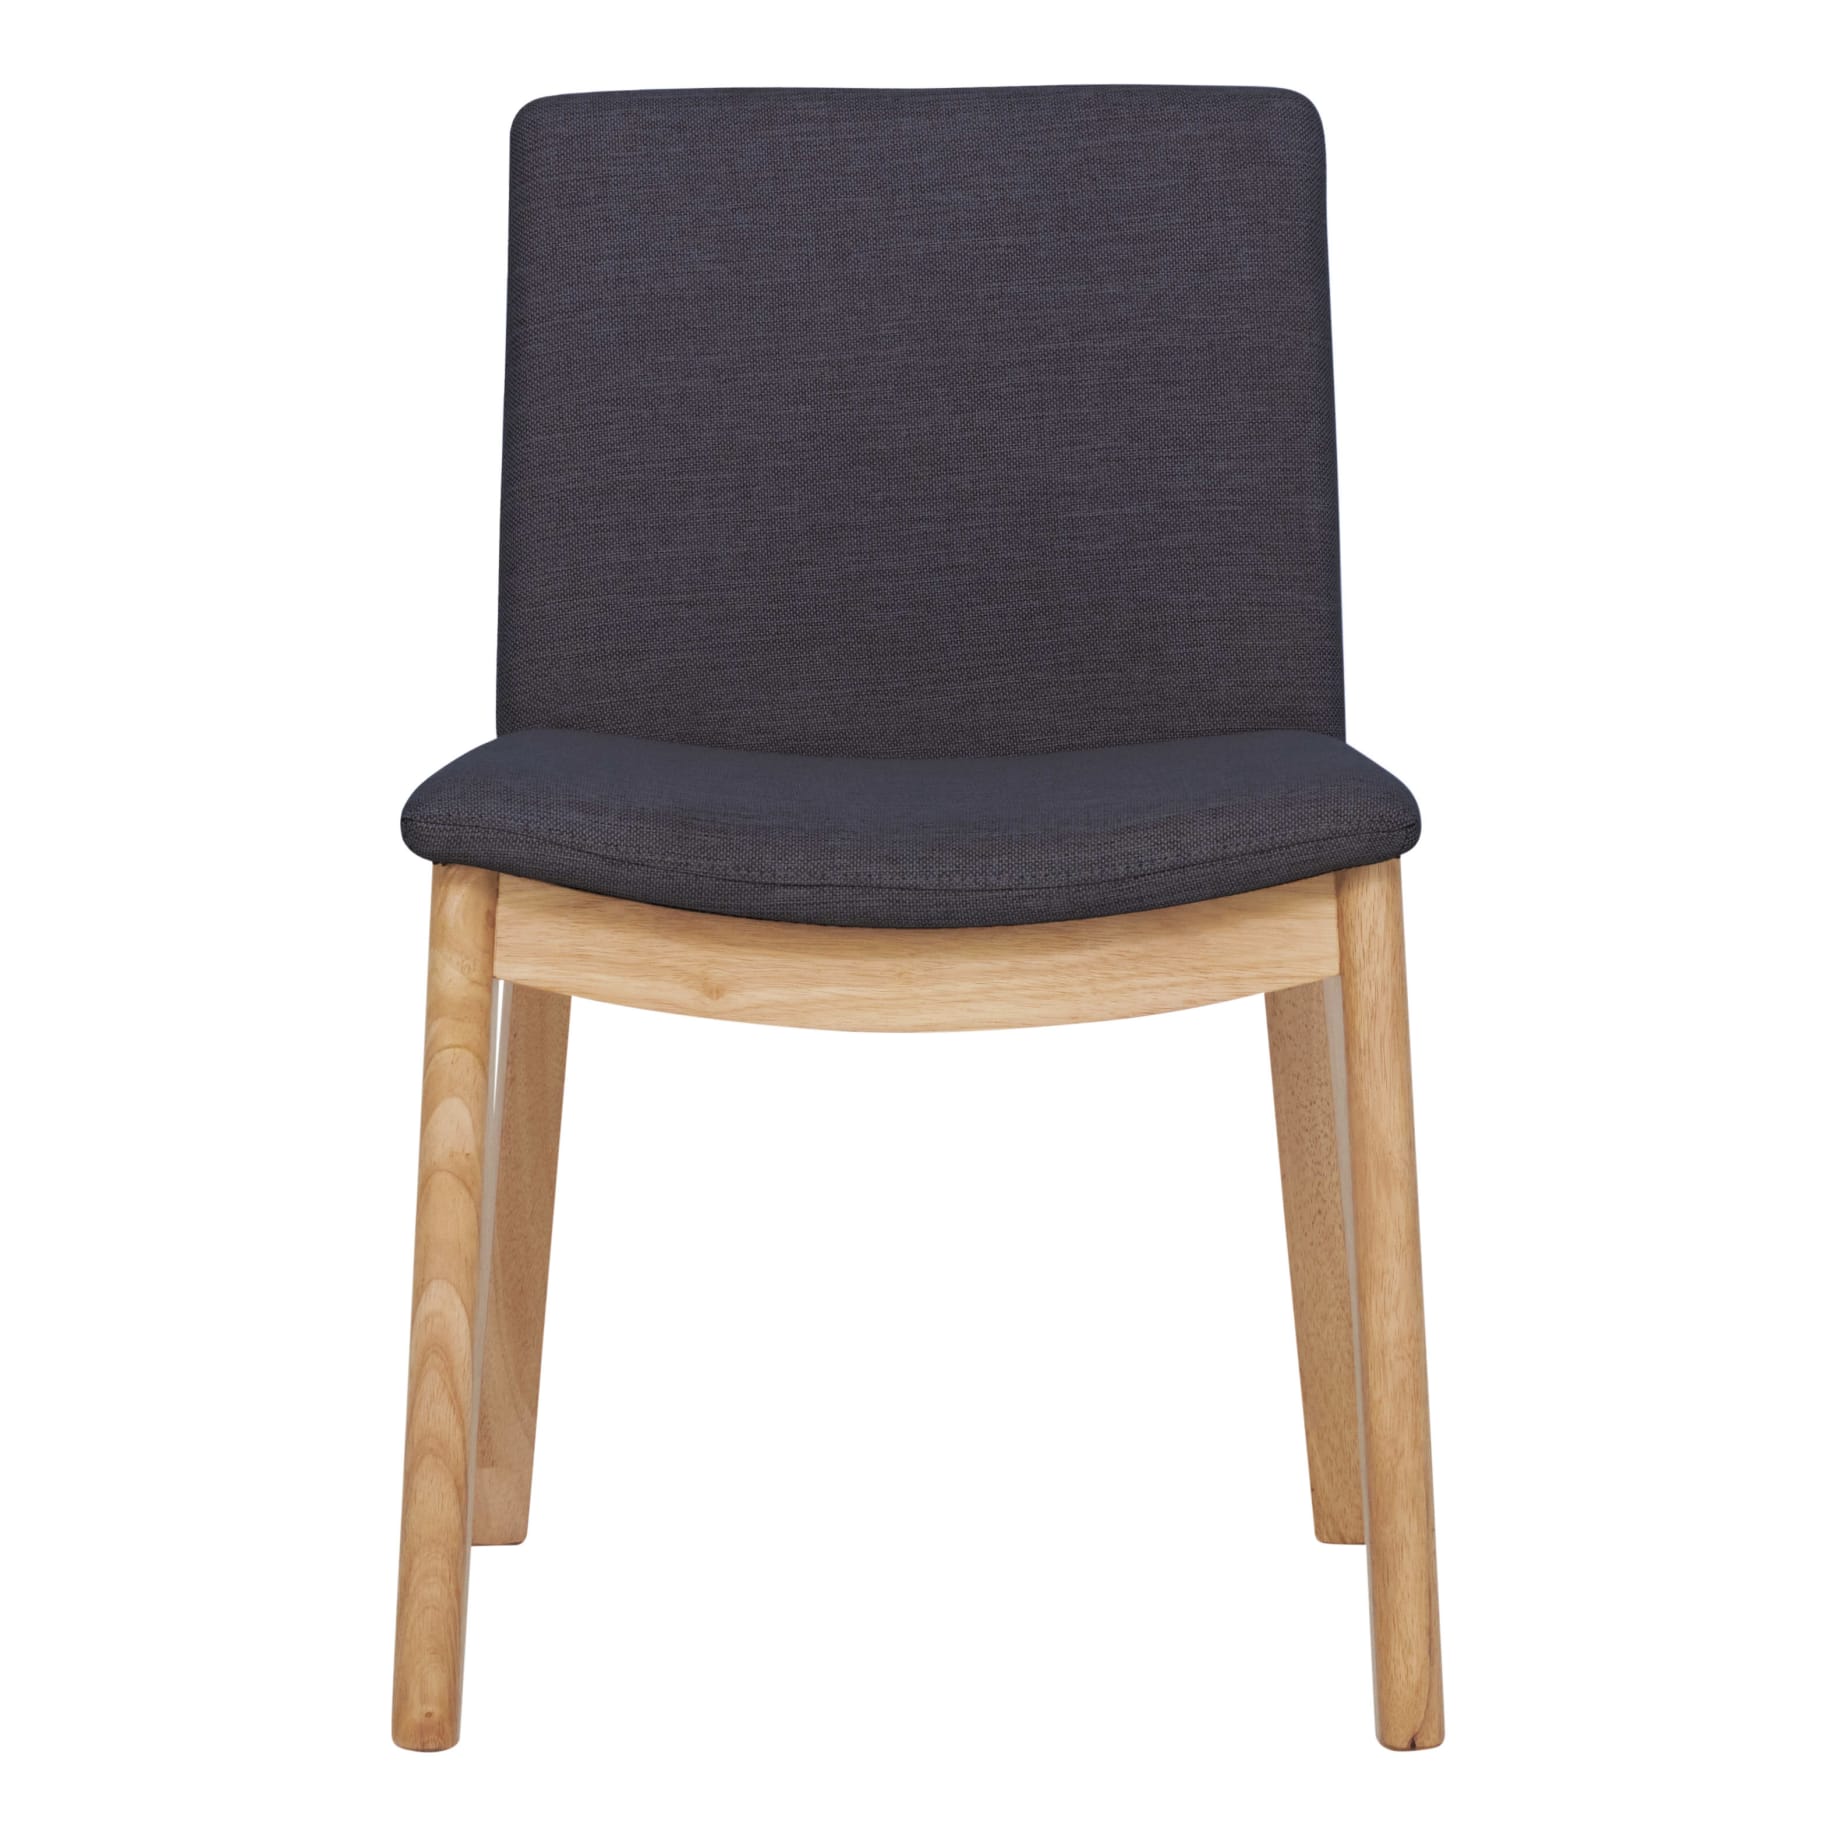 Everest Dining Chair in City Grey / Oak Stain